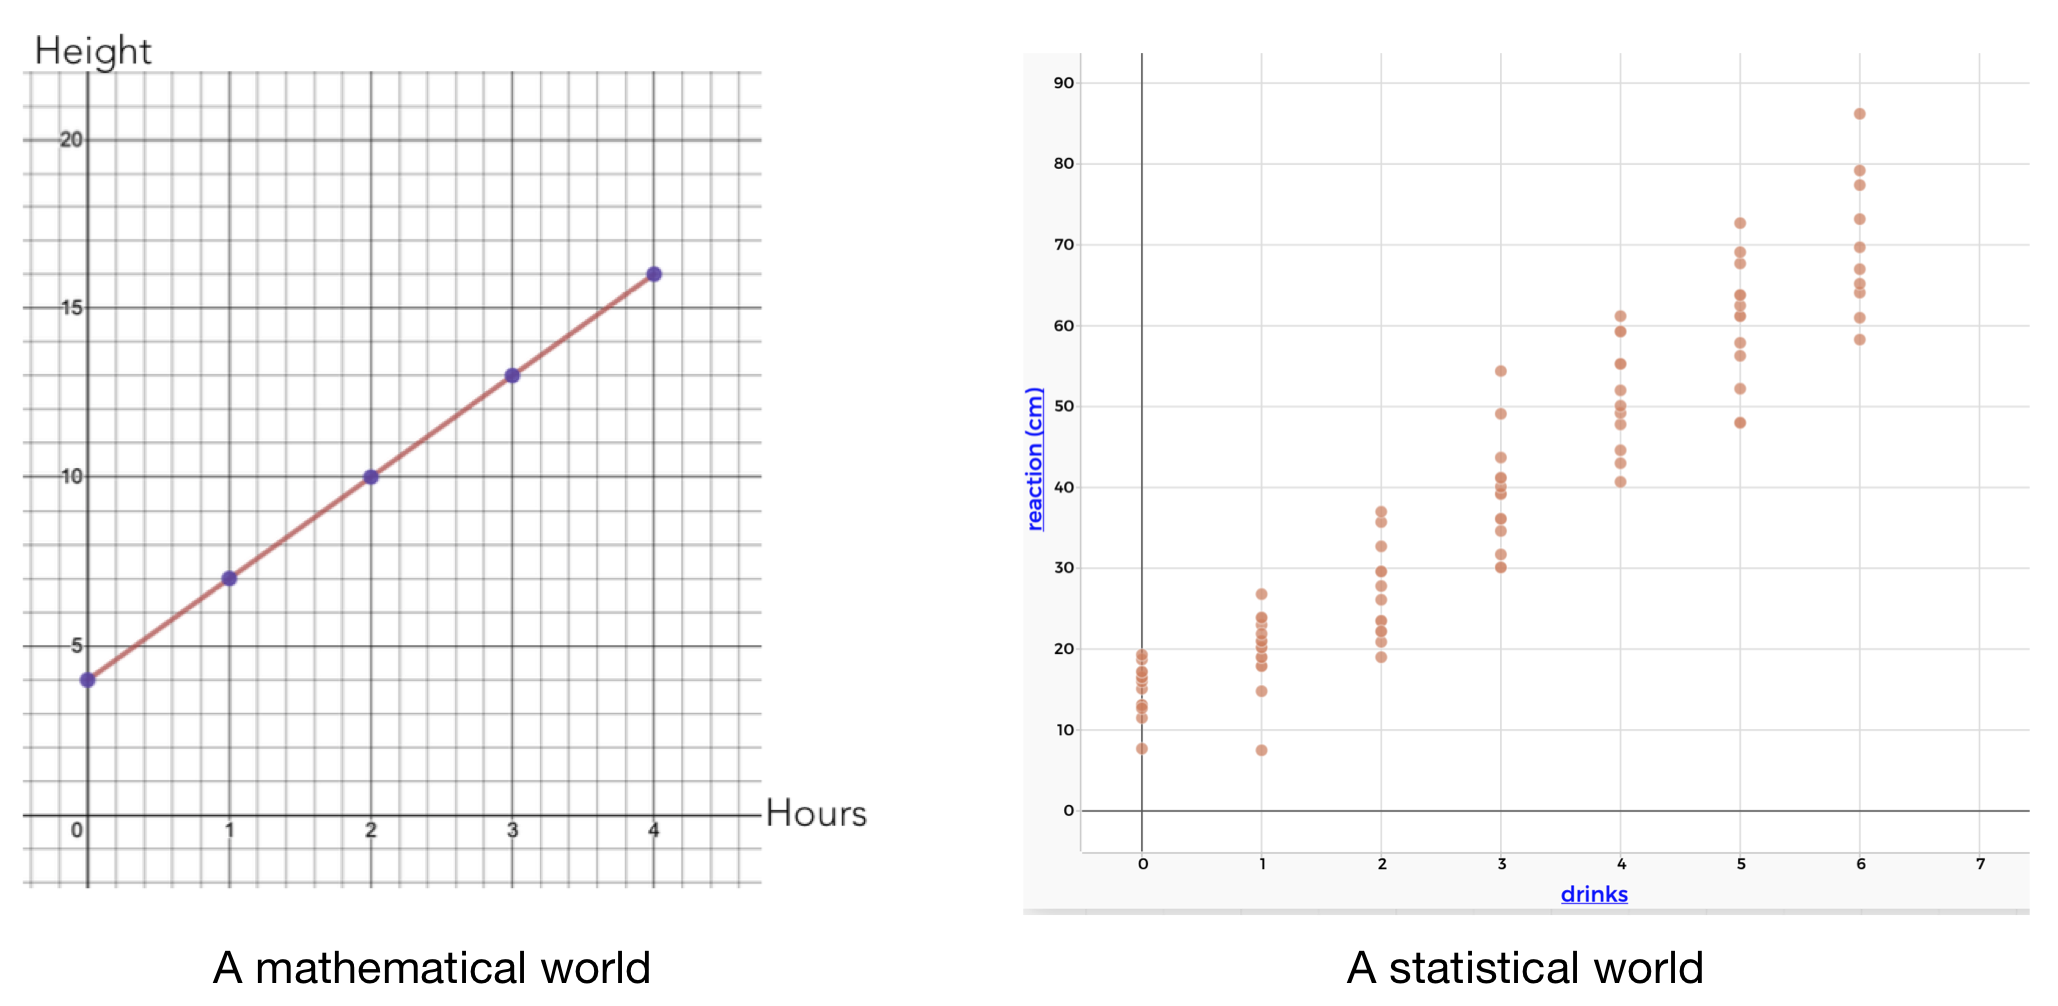 Comparing mathematical and statistical worlds